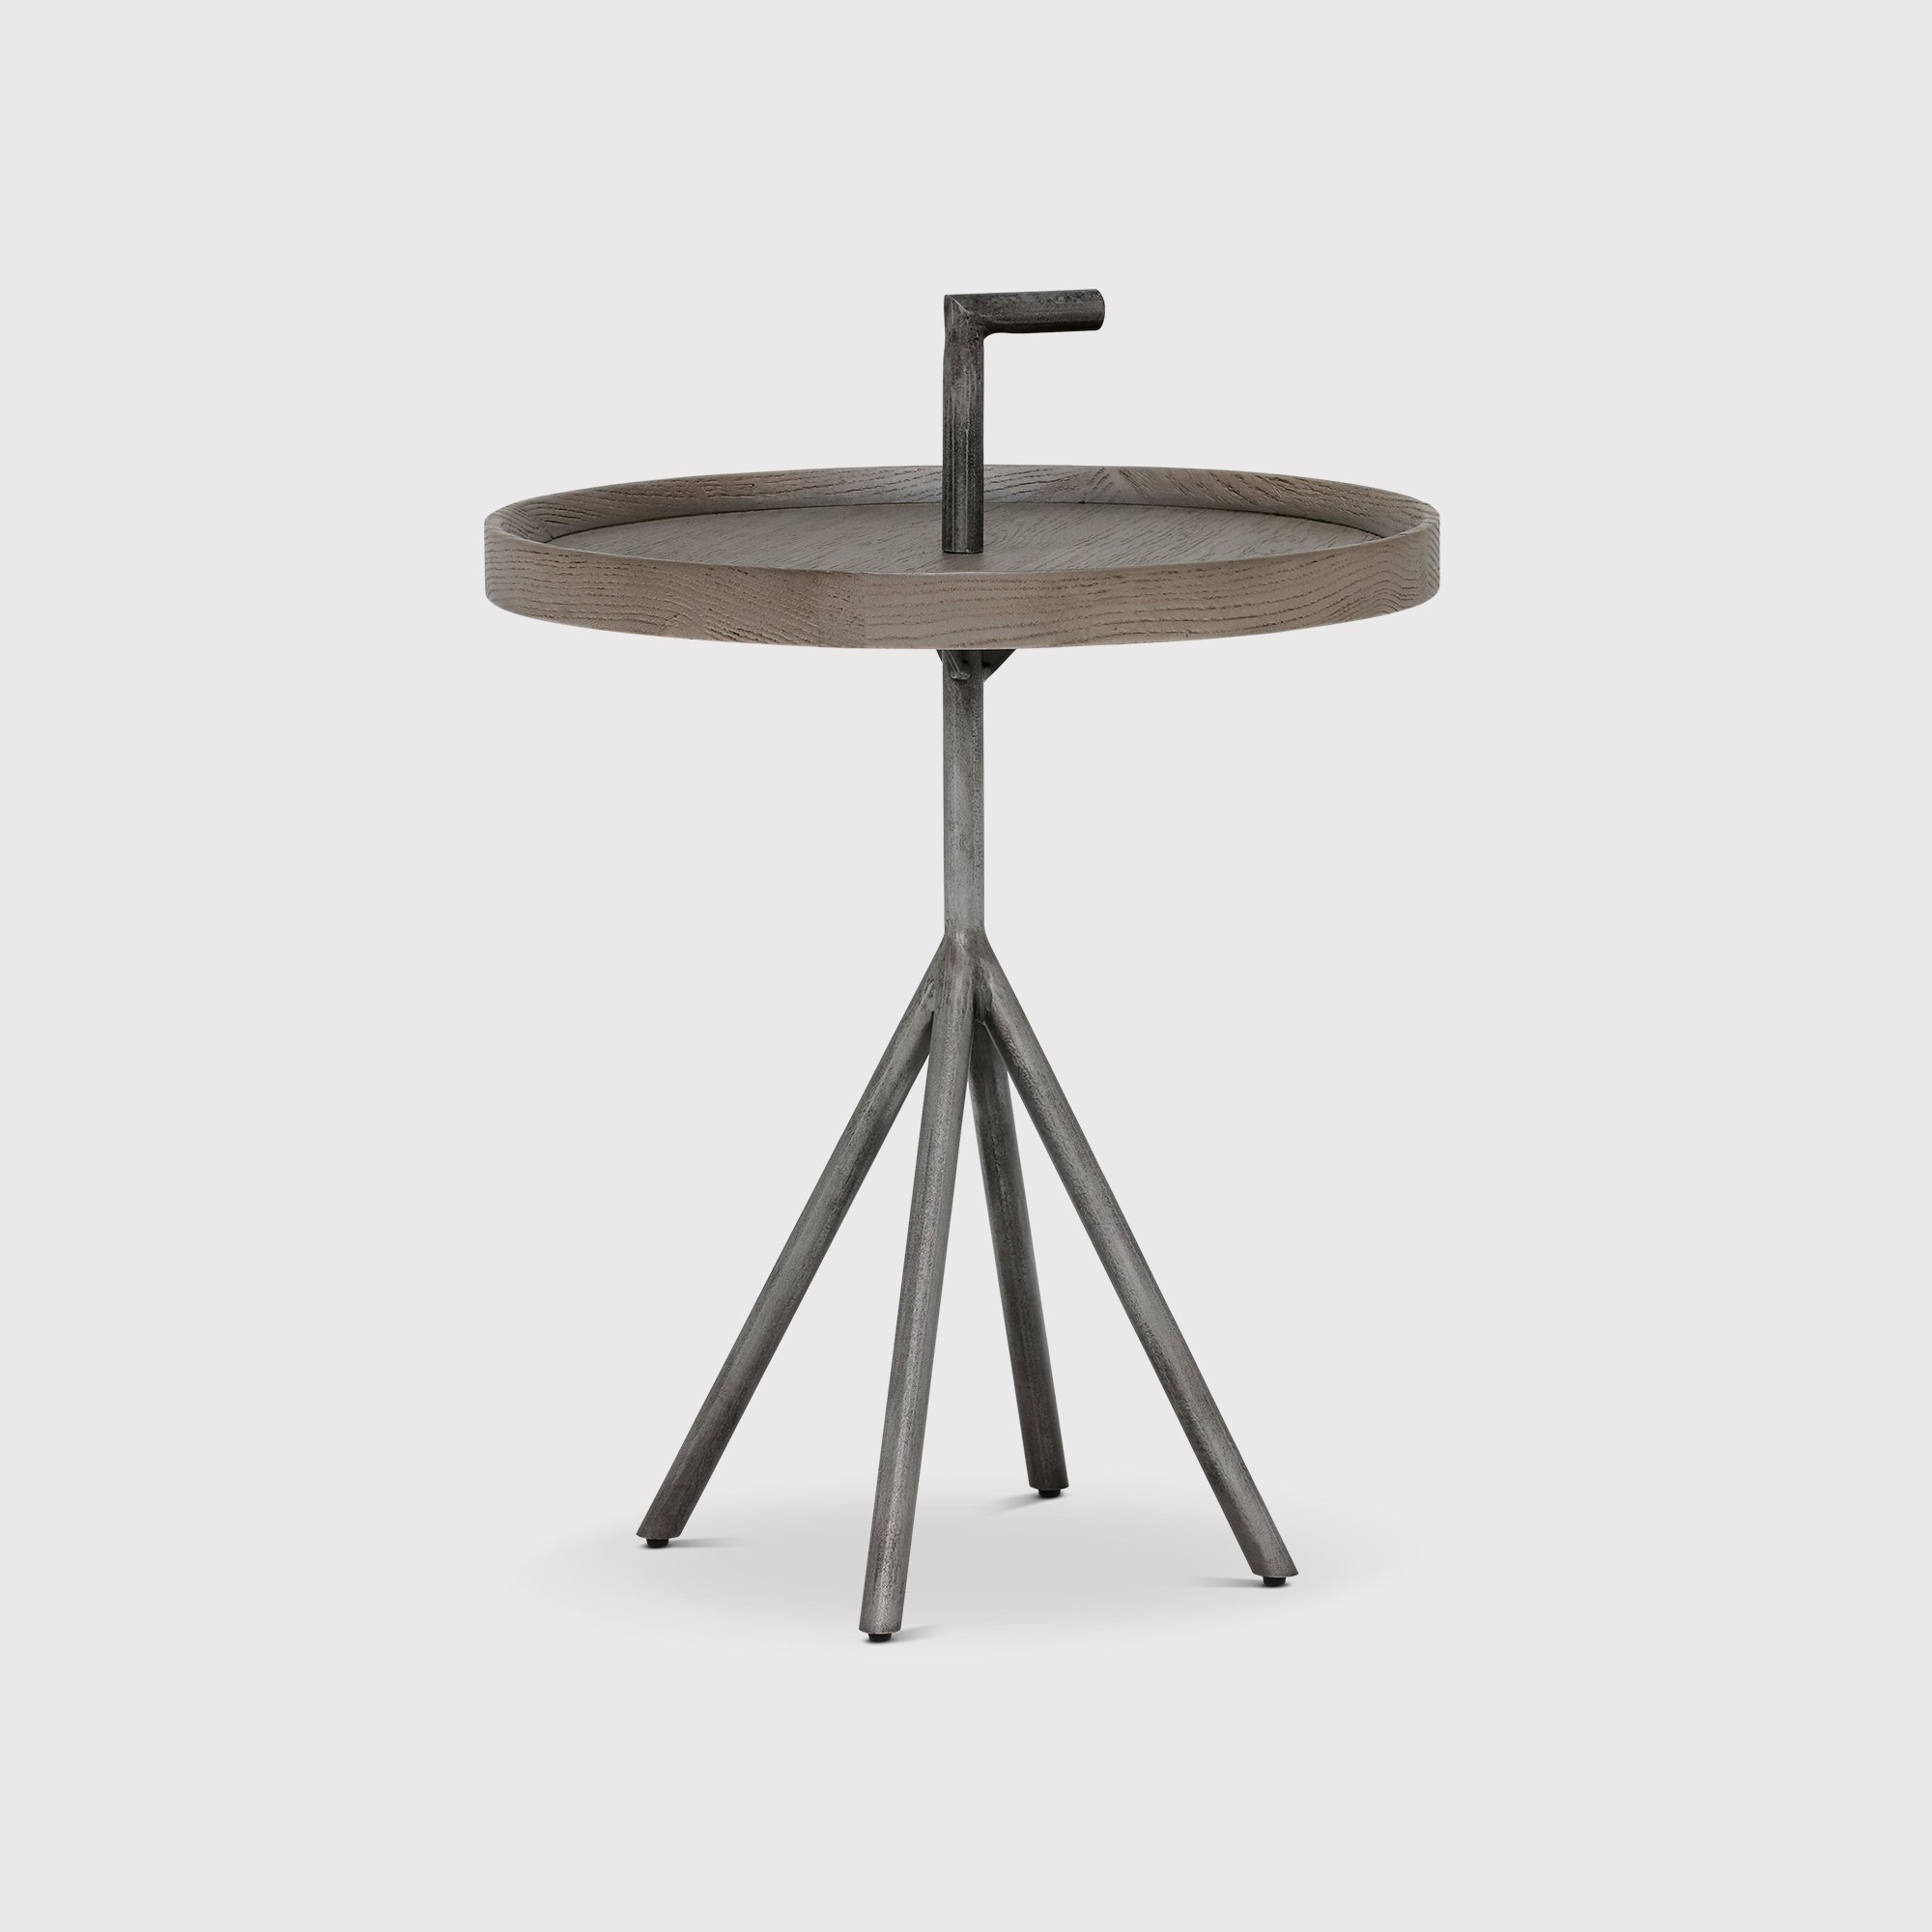 Pamber Round Side Table 45x60cm, Brown | Barker & Stonehouse